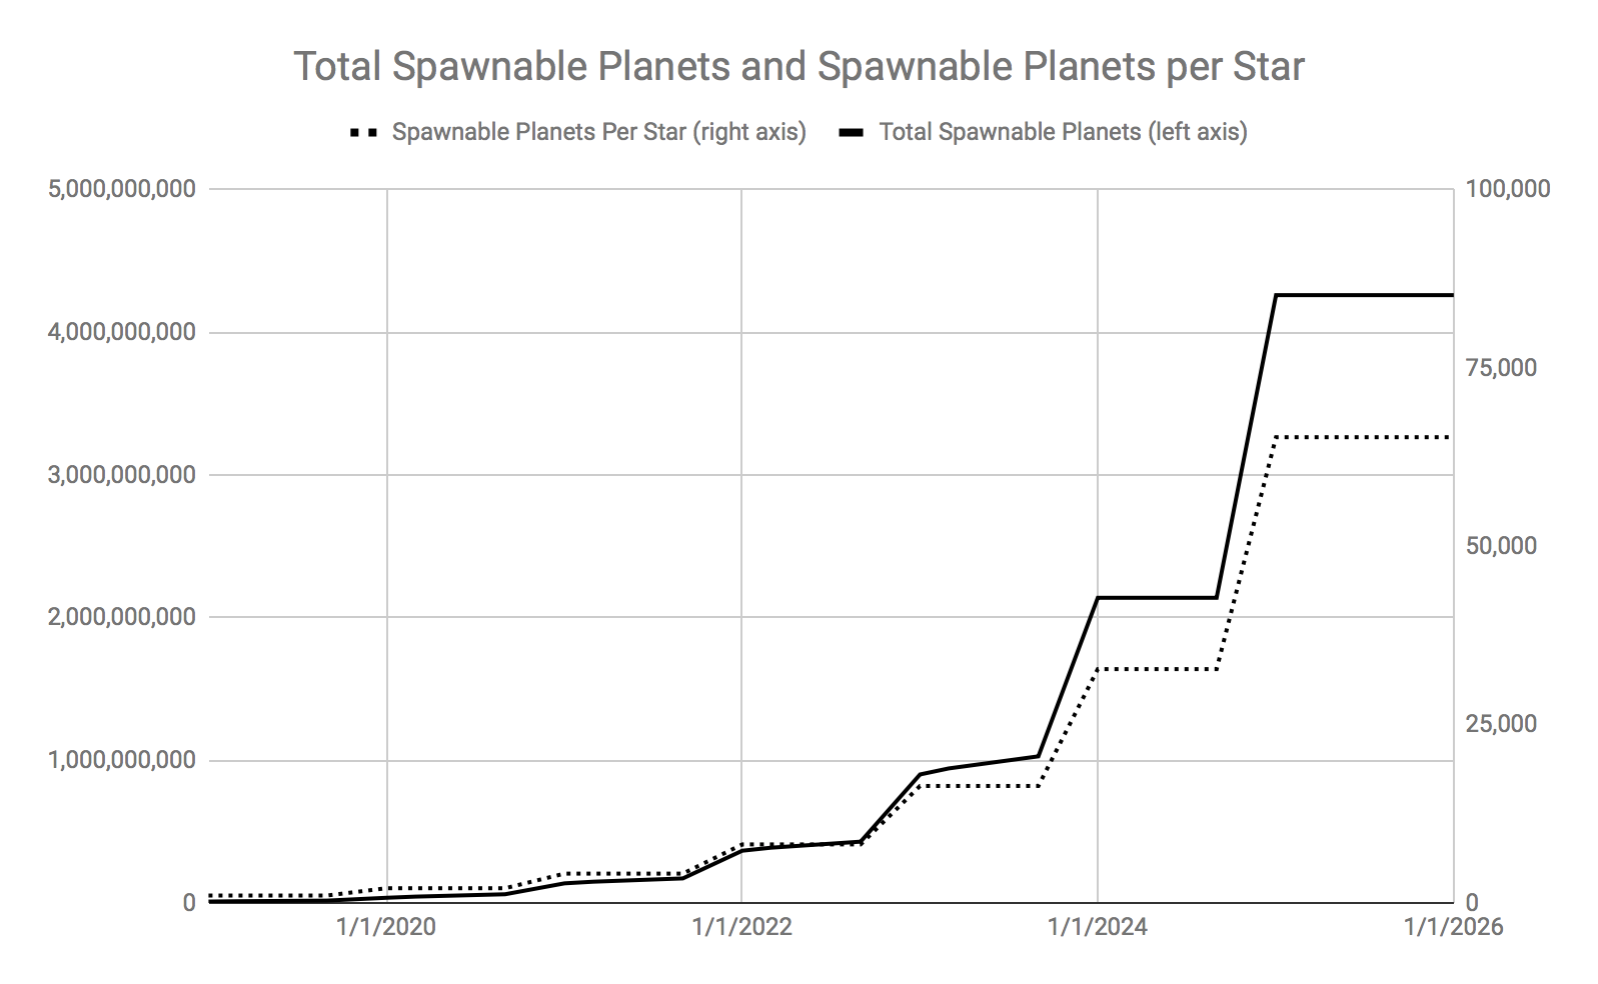 Total Spawnable Planets and Spawnable Planets per Star